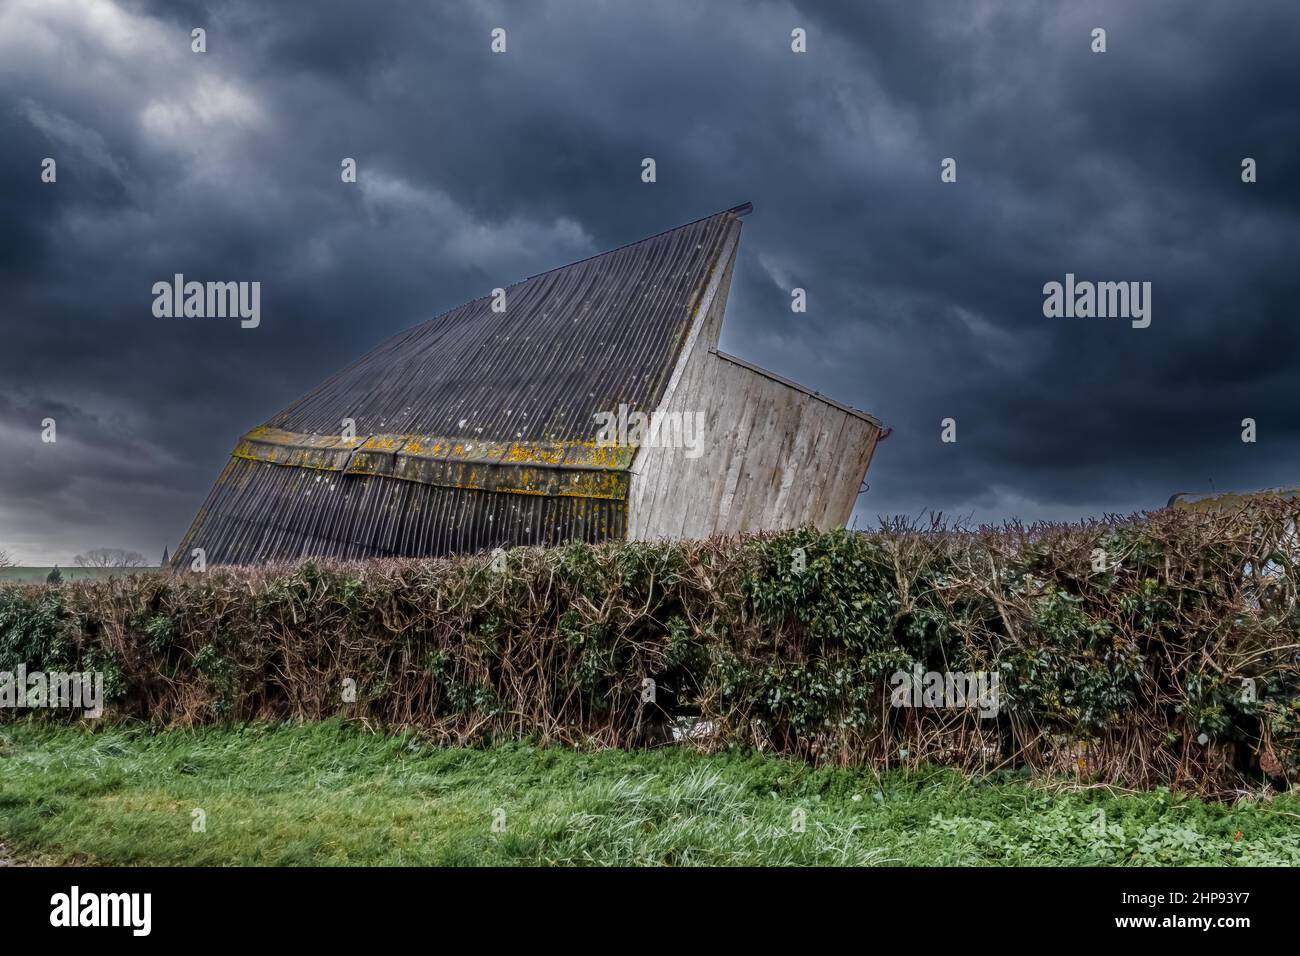 wooden horse stables blown over on to its side strong winds of a storm, thunder storm dark cloud sky Stock Photo